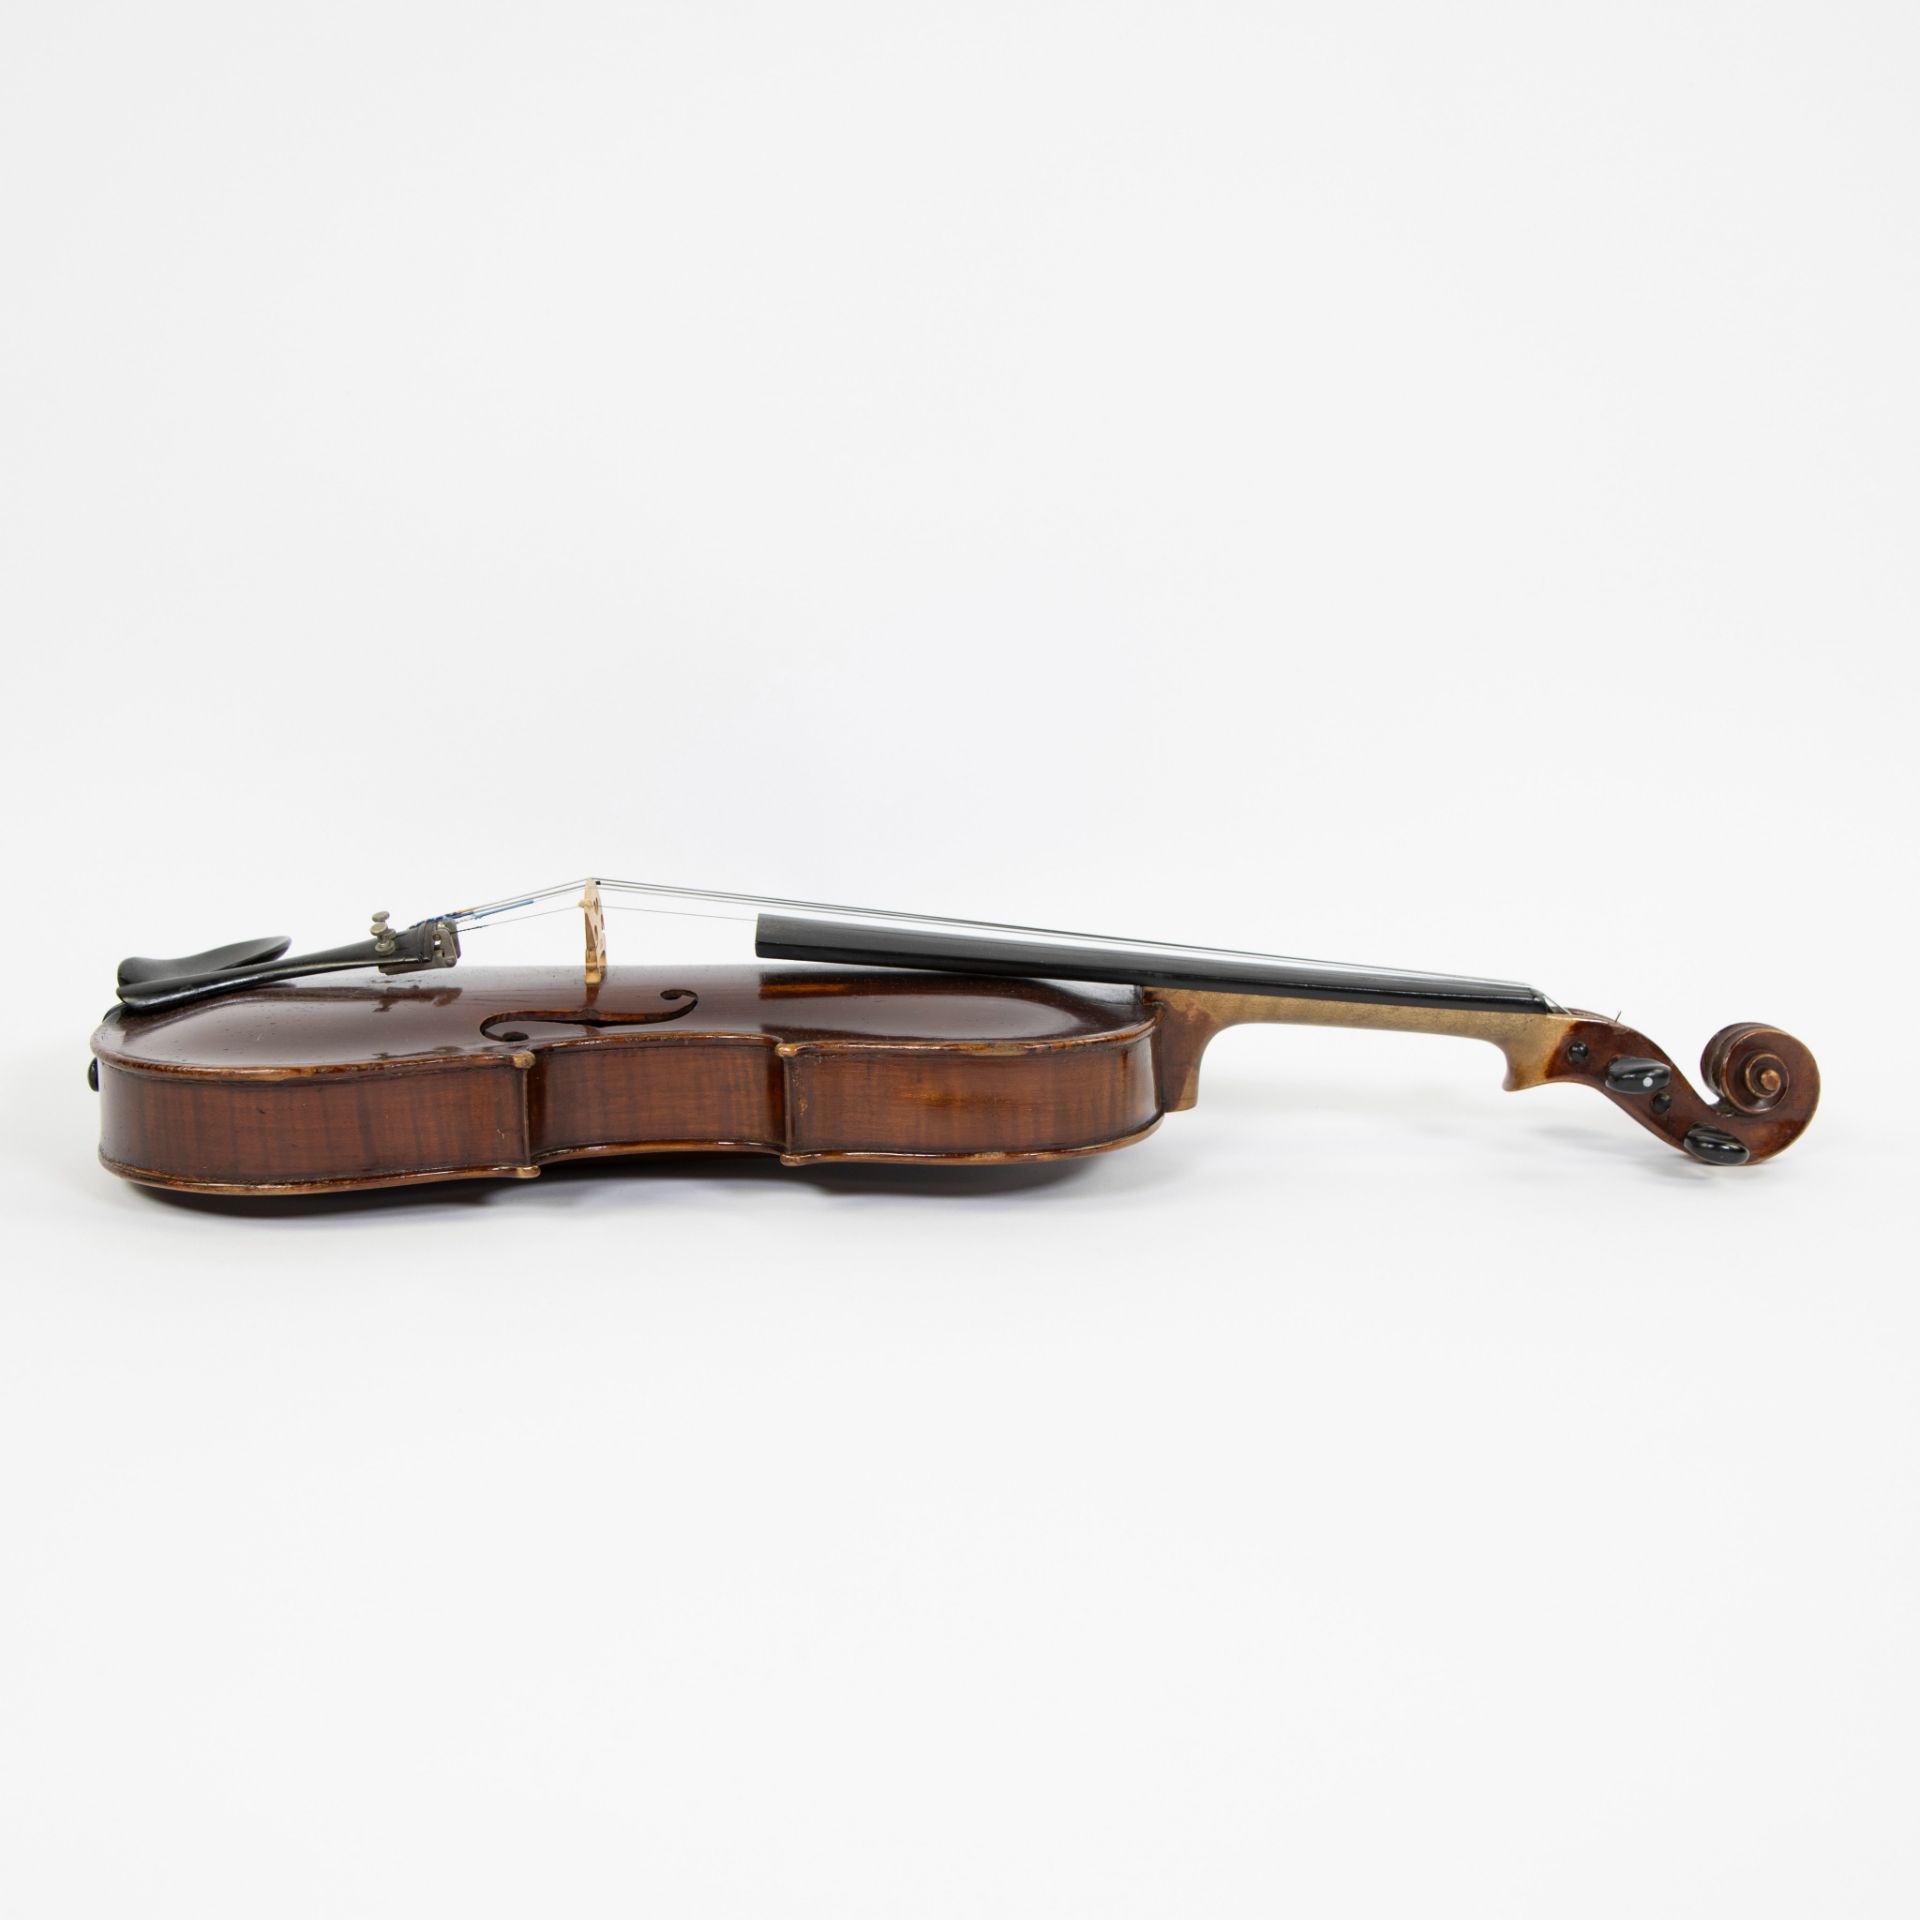 Violin label 'Jocubus Stainer in Absam Prope Oenipontem', 363mm, case incl. - Image 4 of 5